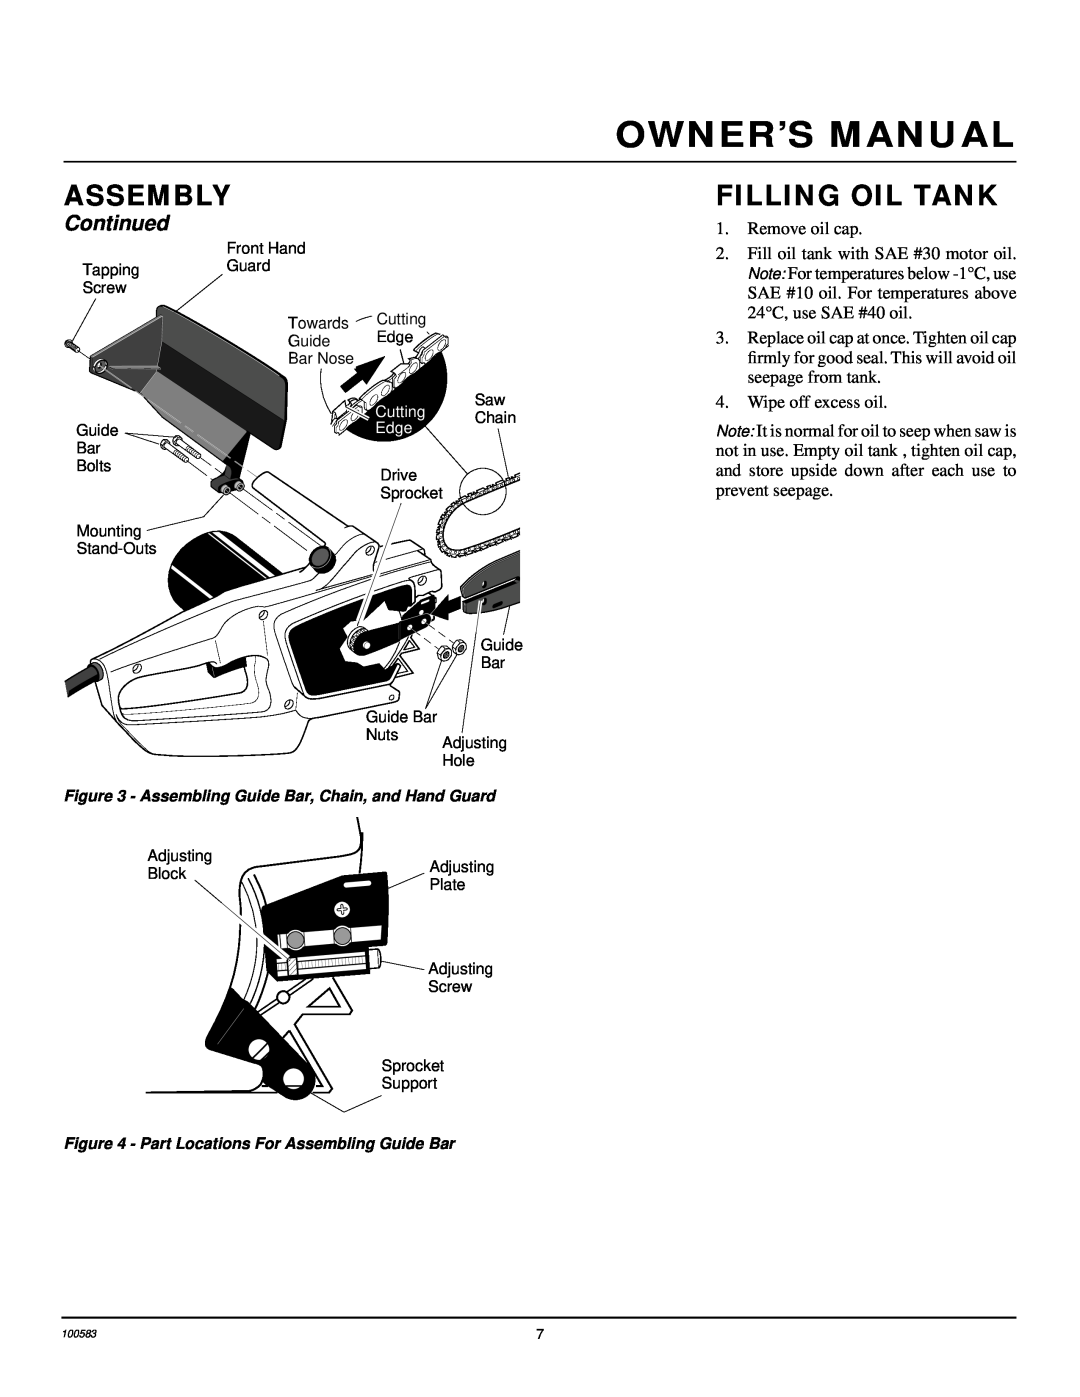 Remington EL-7 14-inch, LNT-2 8-inch, LNT-2 10-inch, LNT-3 12-inch Filling Oil Tank, Assembly, Continued, Remove oil cap 